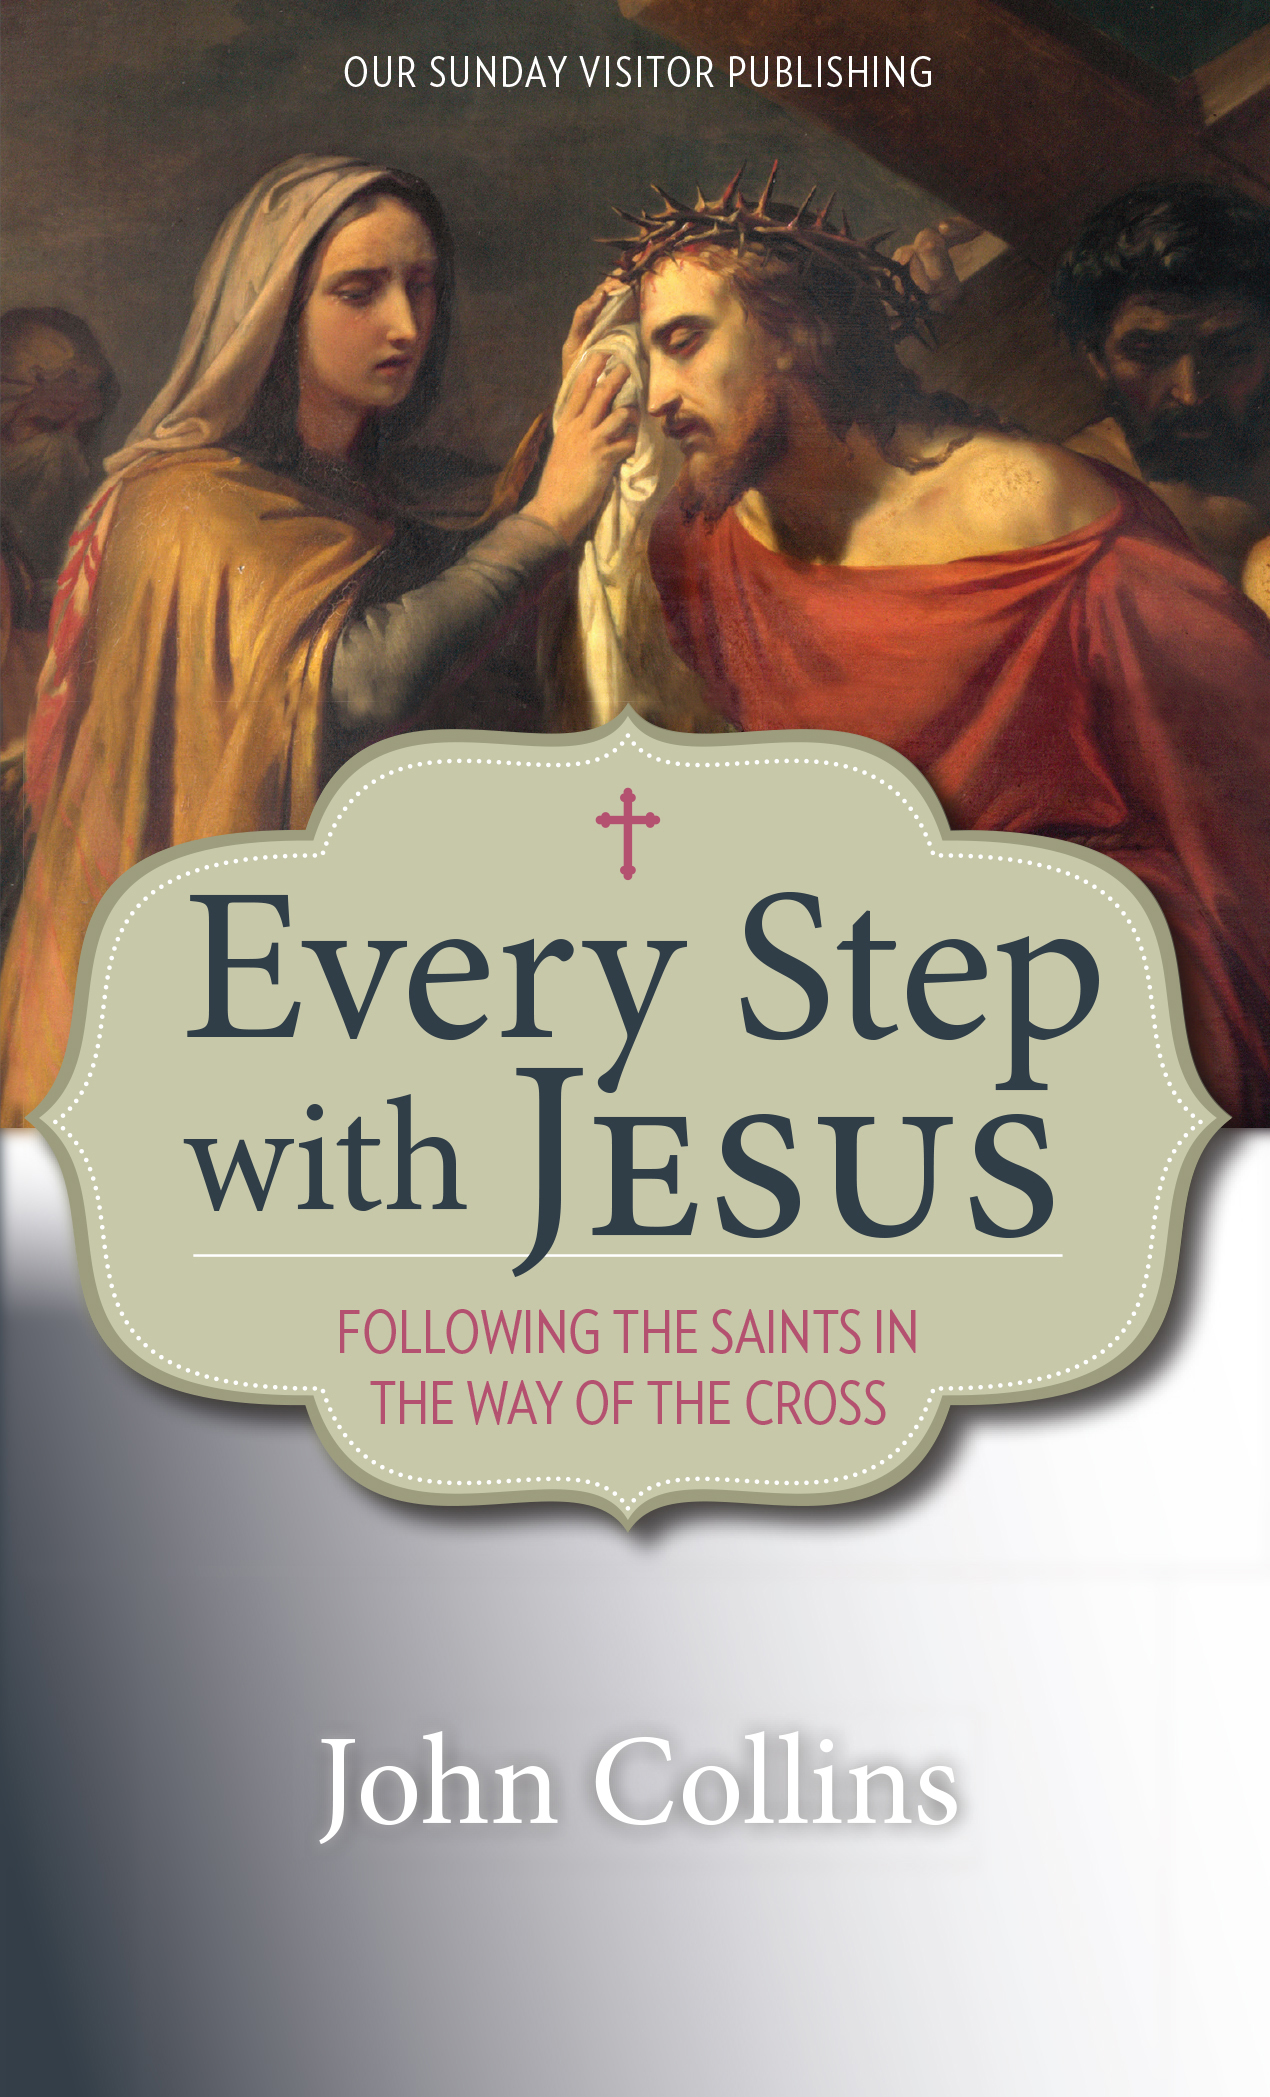 Every Step with Jesus Following the Saints in the Way of the Cross John Collins - photo 1